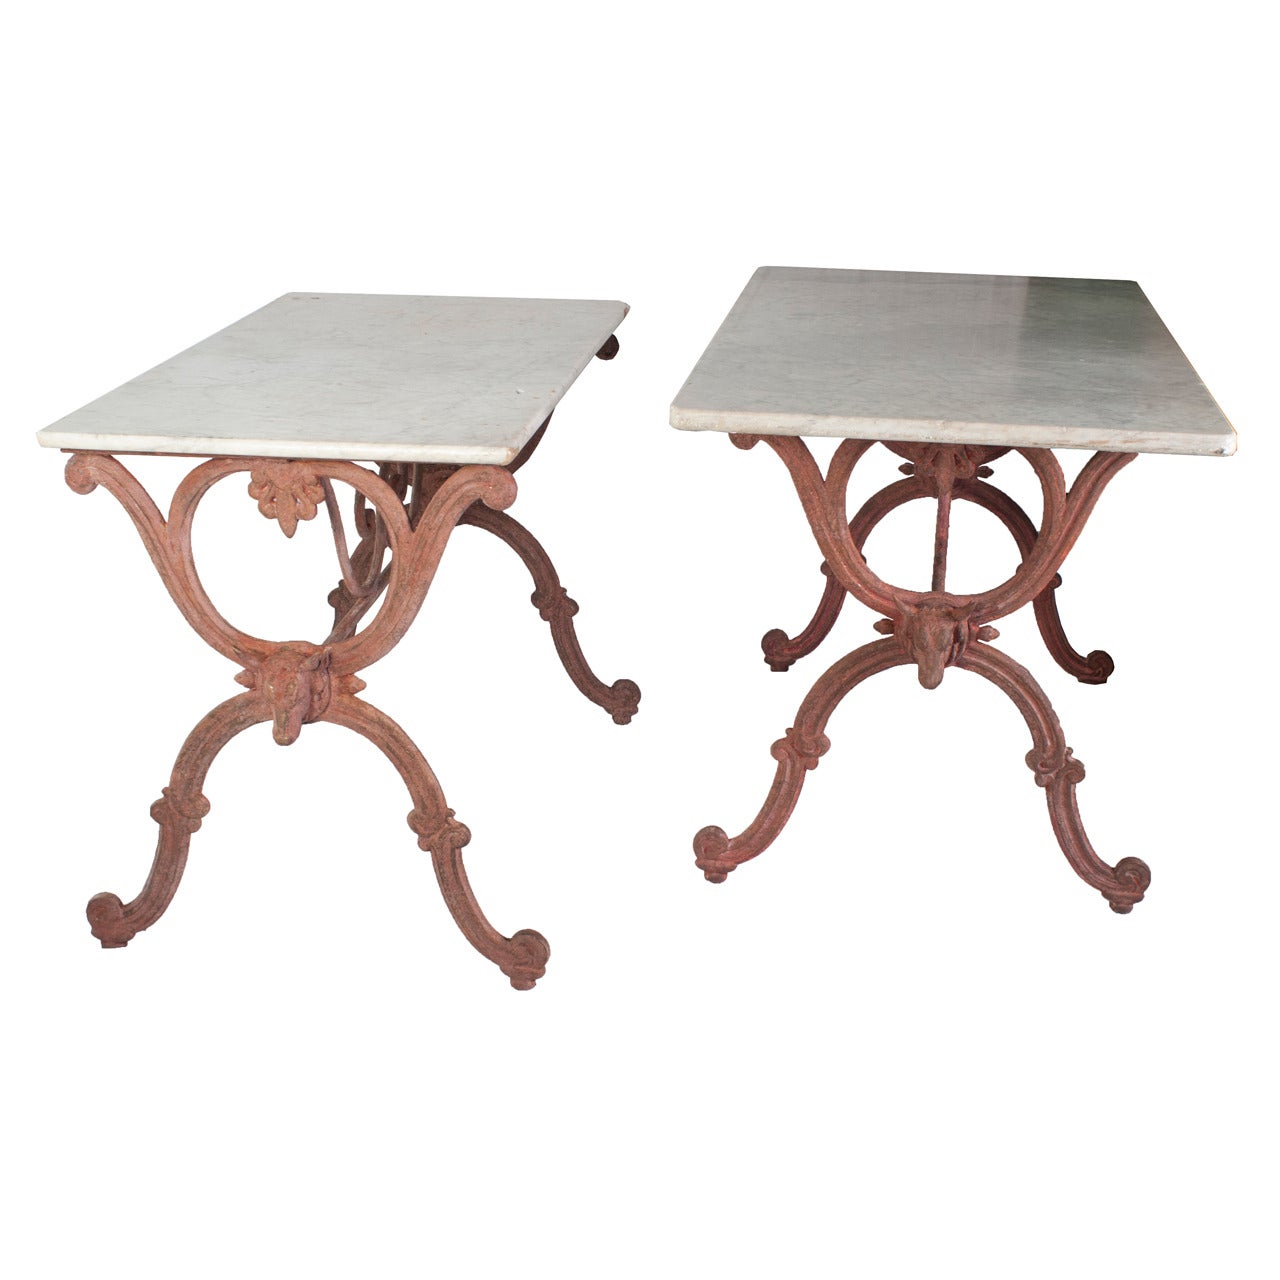 A Pair of Tables with Bull Heads Decoration with a White Marble Top For Sale